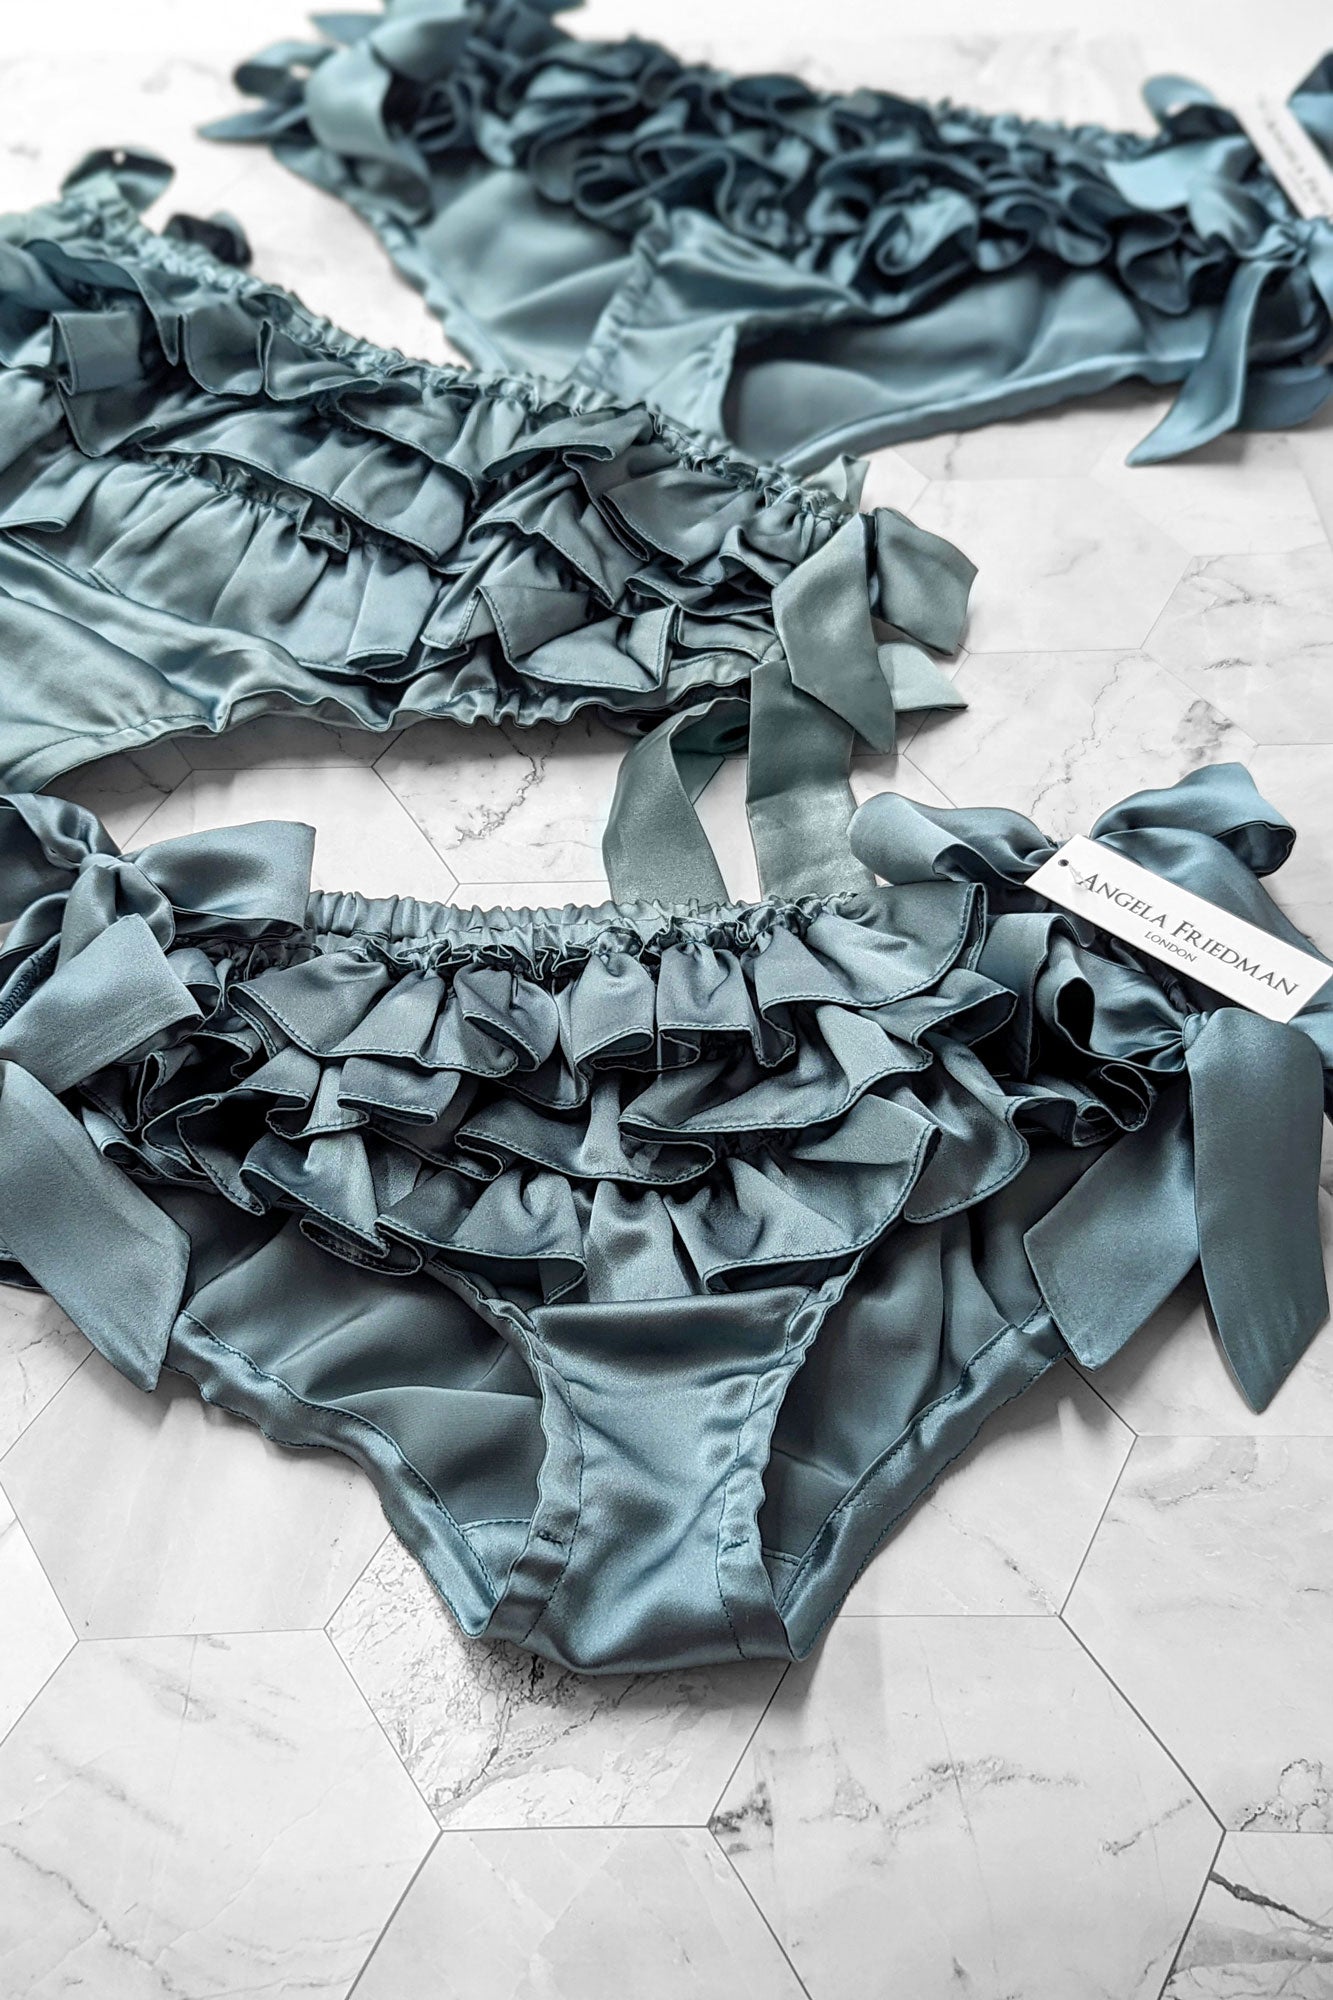 100% silk satin ruffled panties in teal blue with bows and side ties